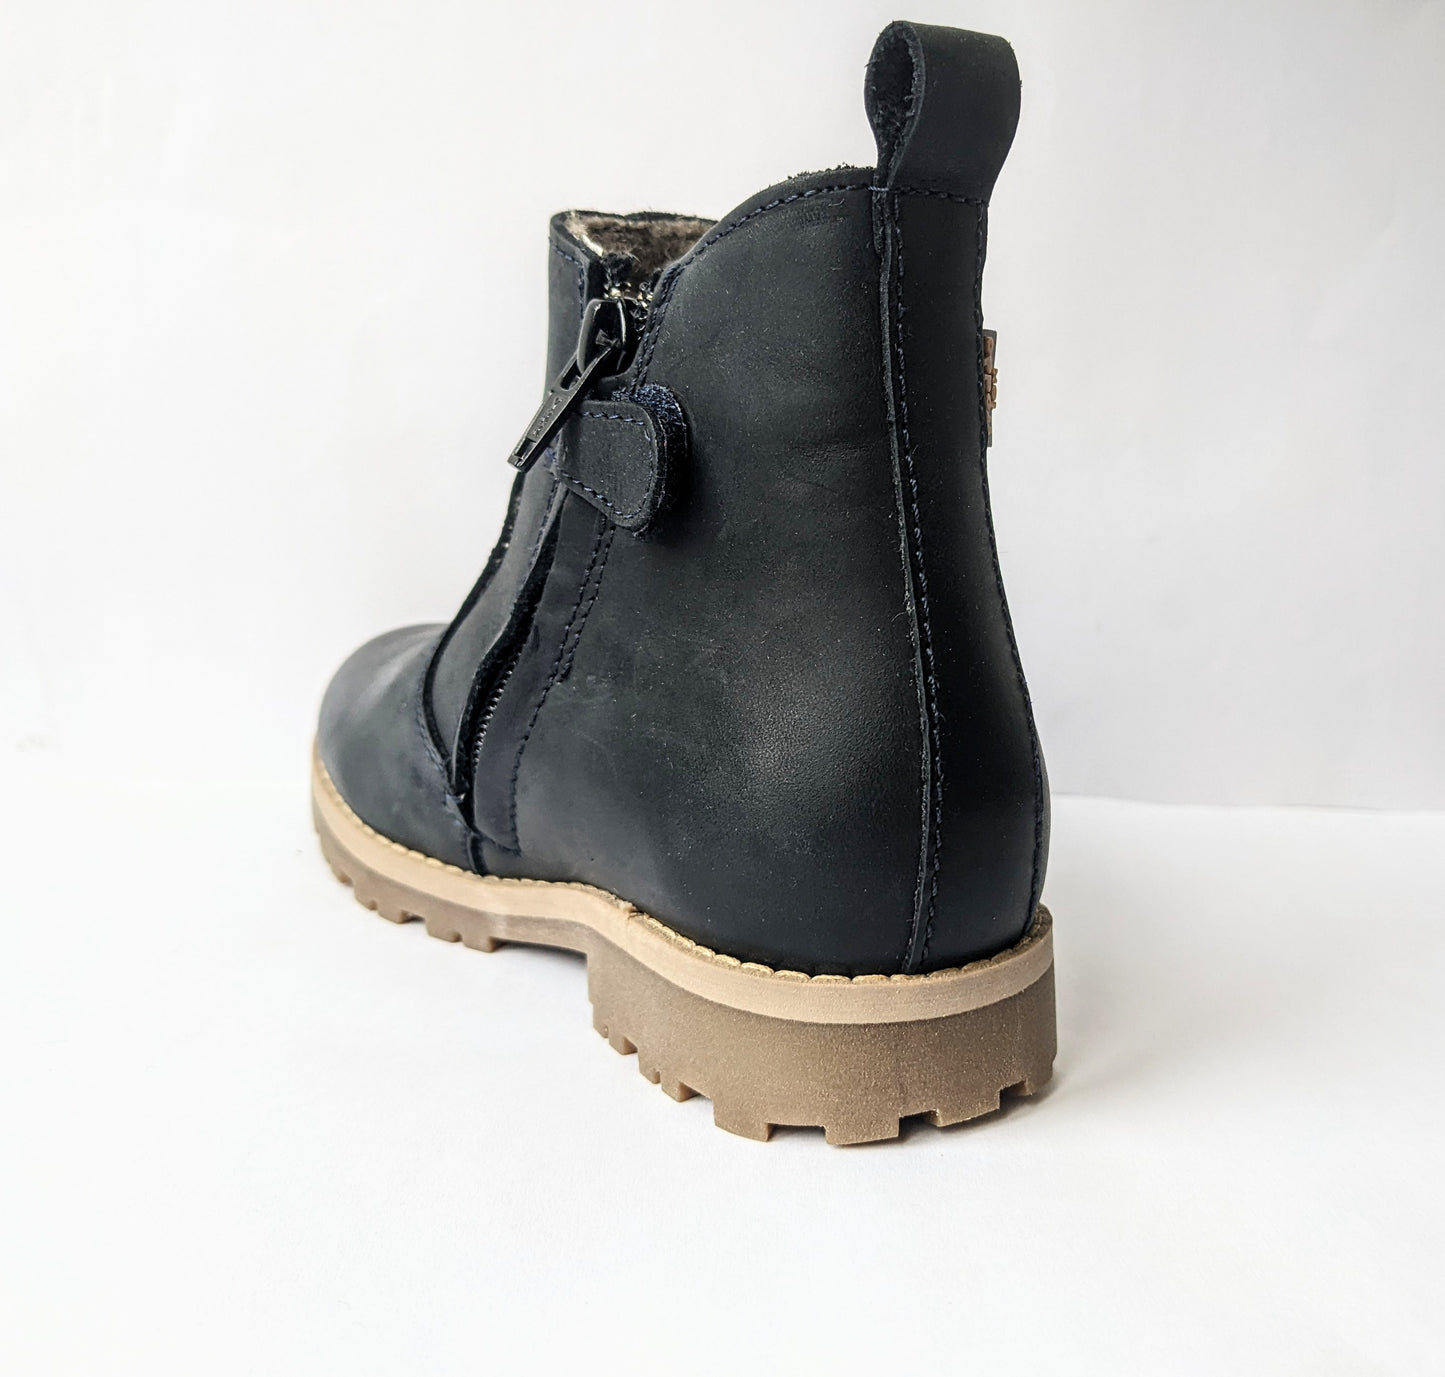 A fur lined unisex ankle boot by Froddo, style G3160111, in dark Blue nubuck with zip fastening. Back view